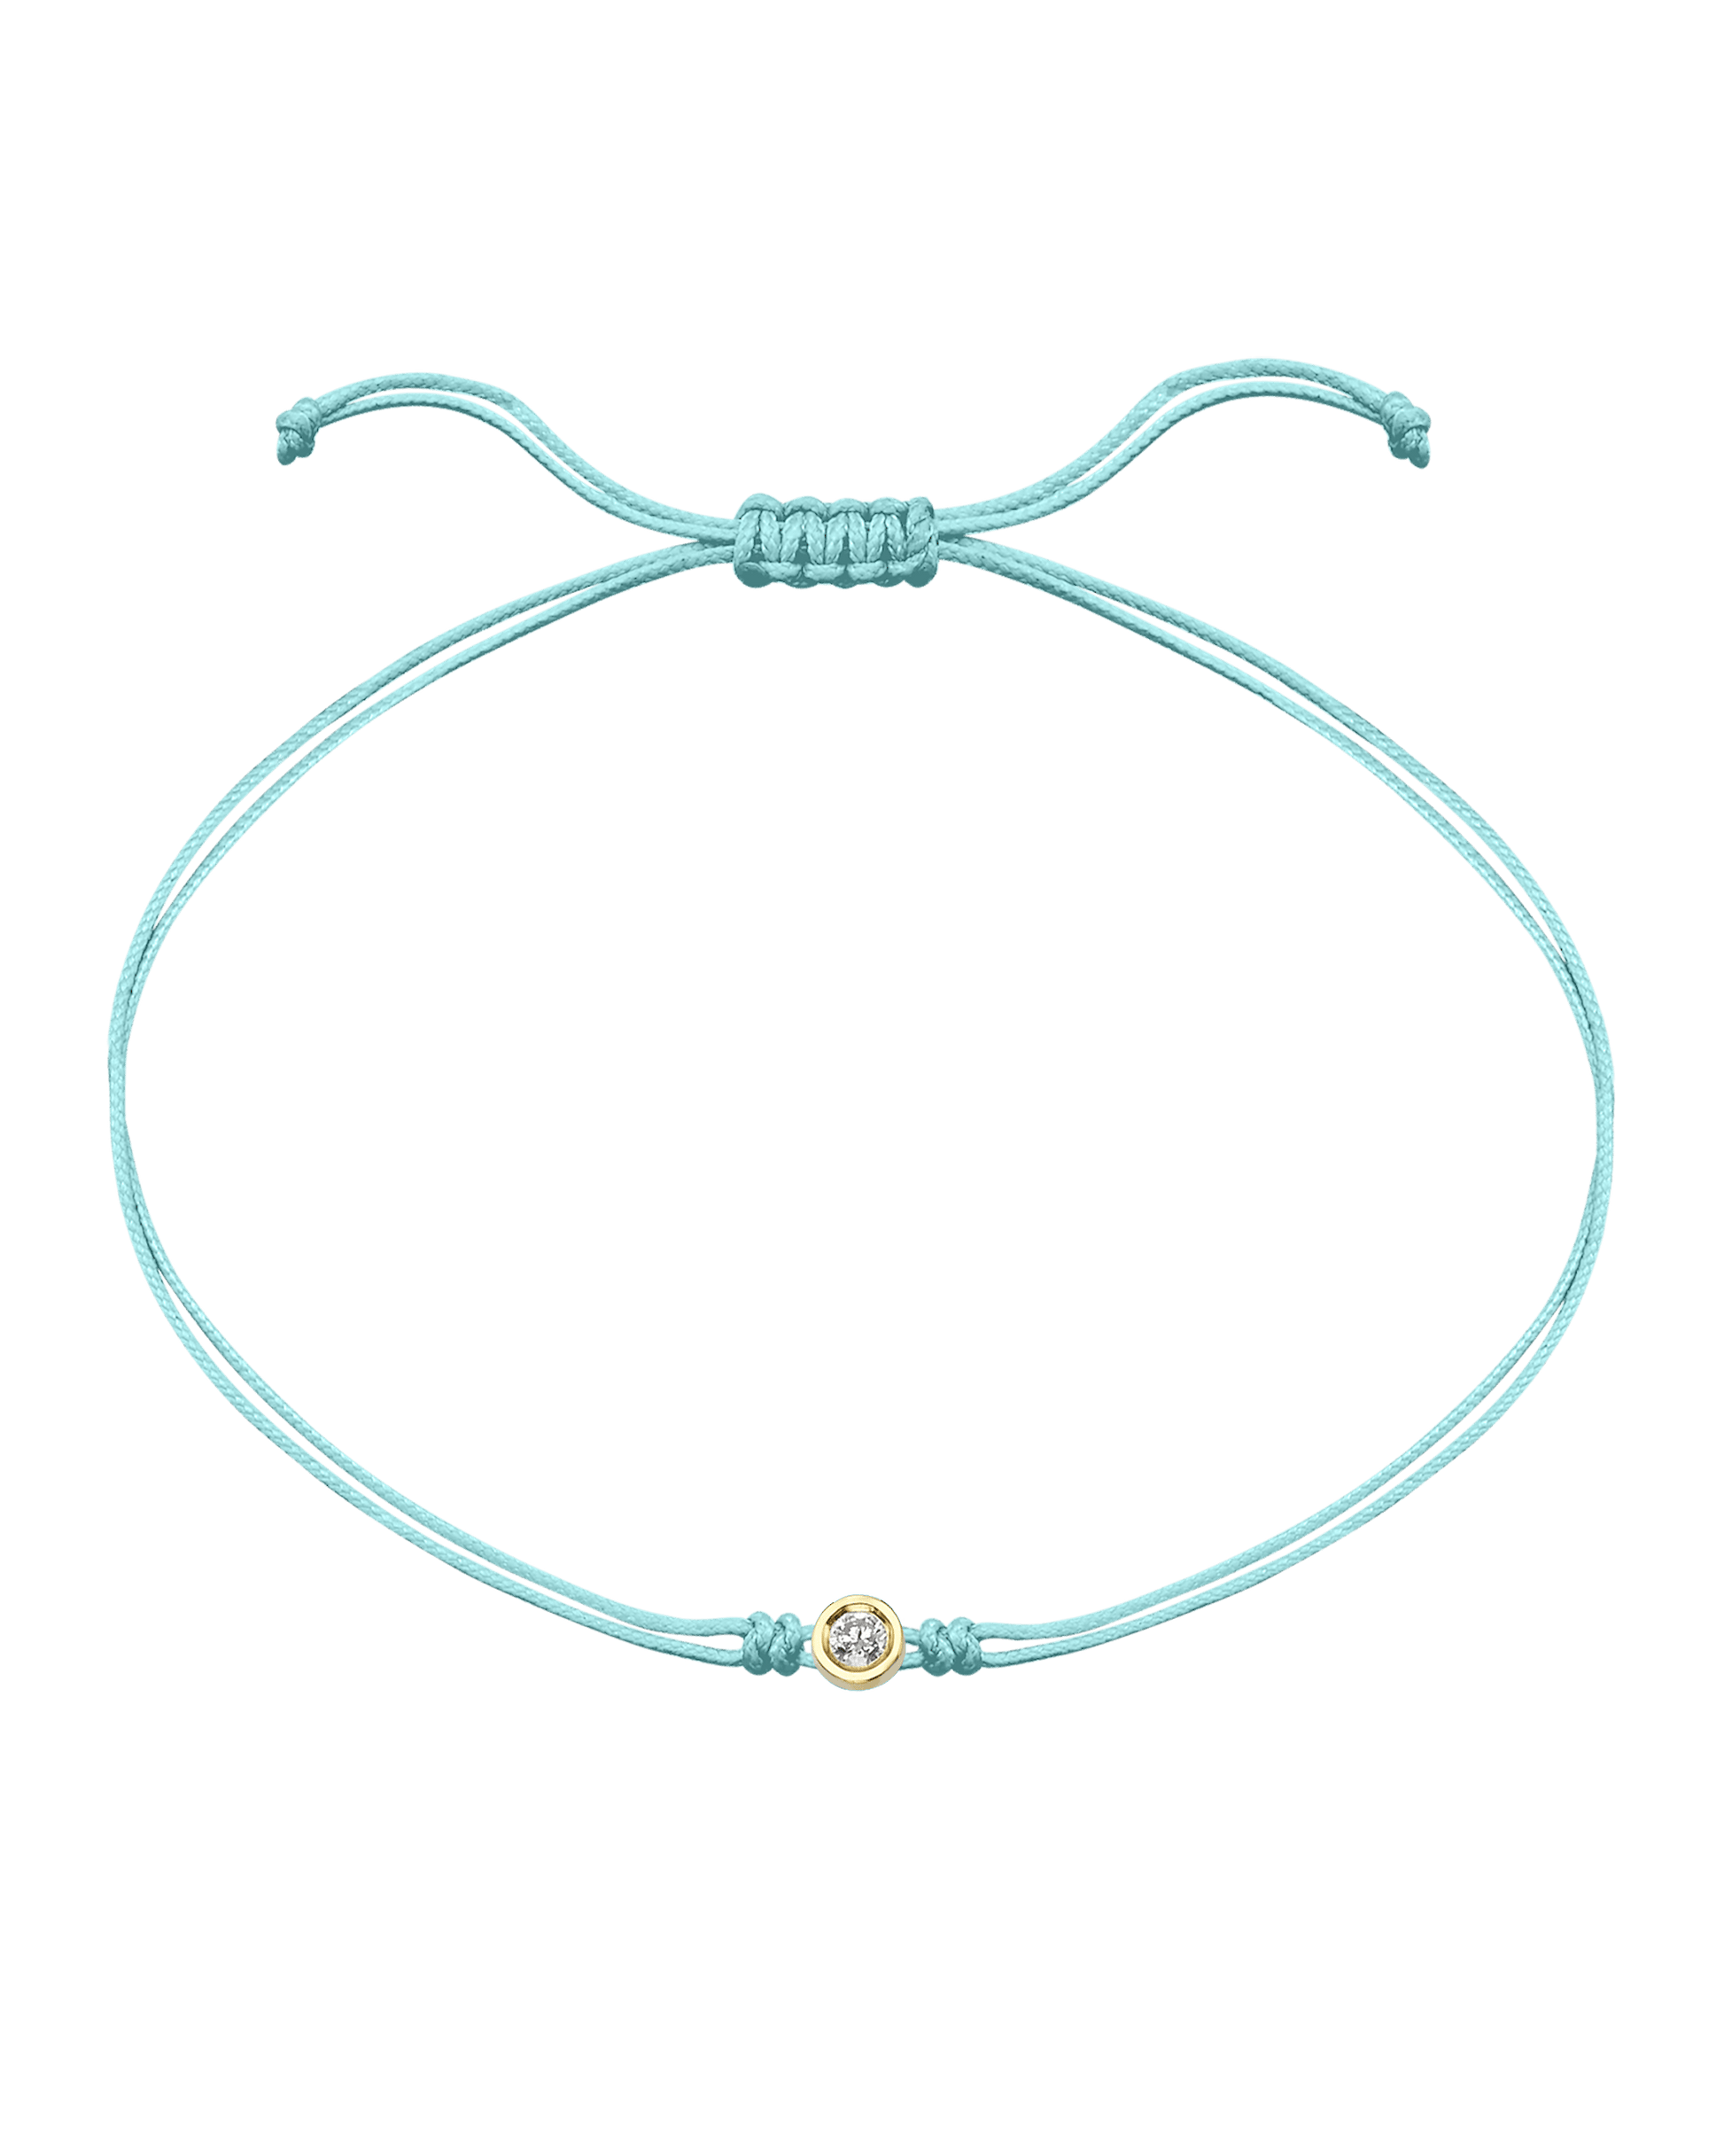 Summer Edition : The Classic String of Love - 14K Yellow Gold Bracelets magal-dev Frozen Blue Daiquiri - Turquoise Medium: 0.05ct 